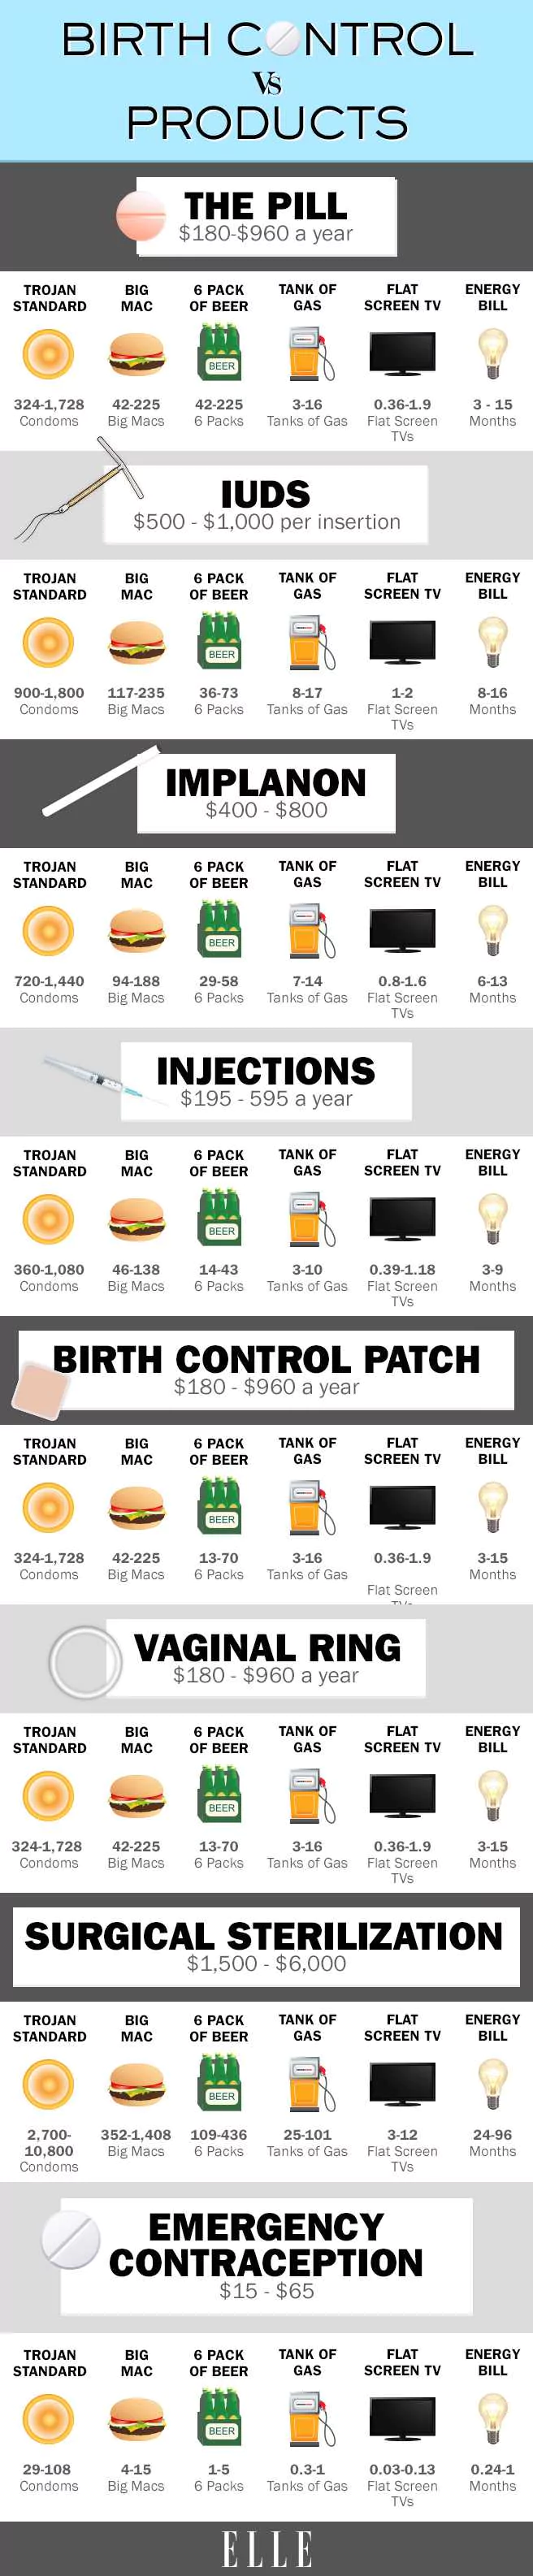 The Cost Of Birth Control